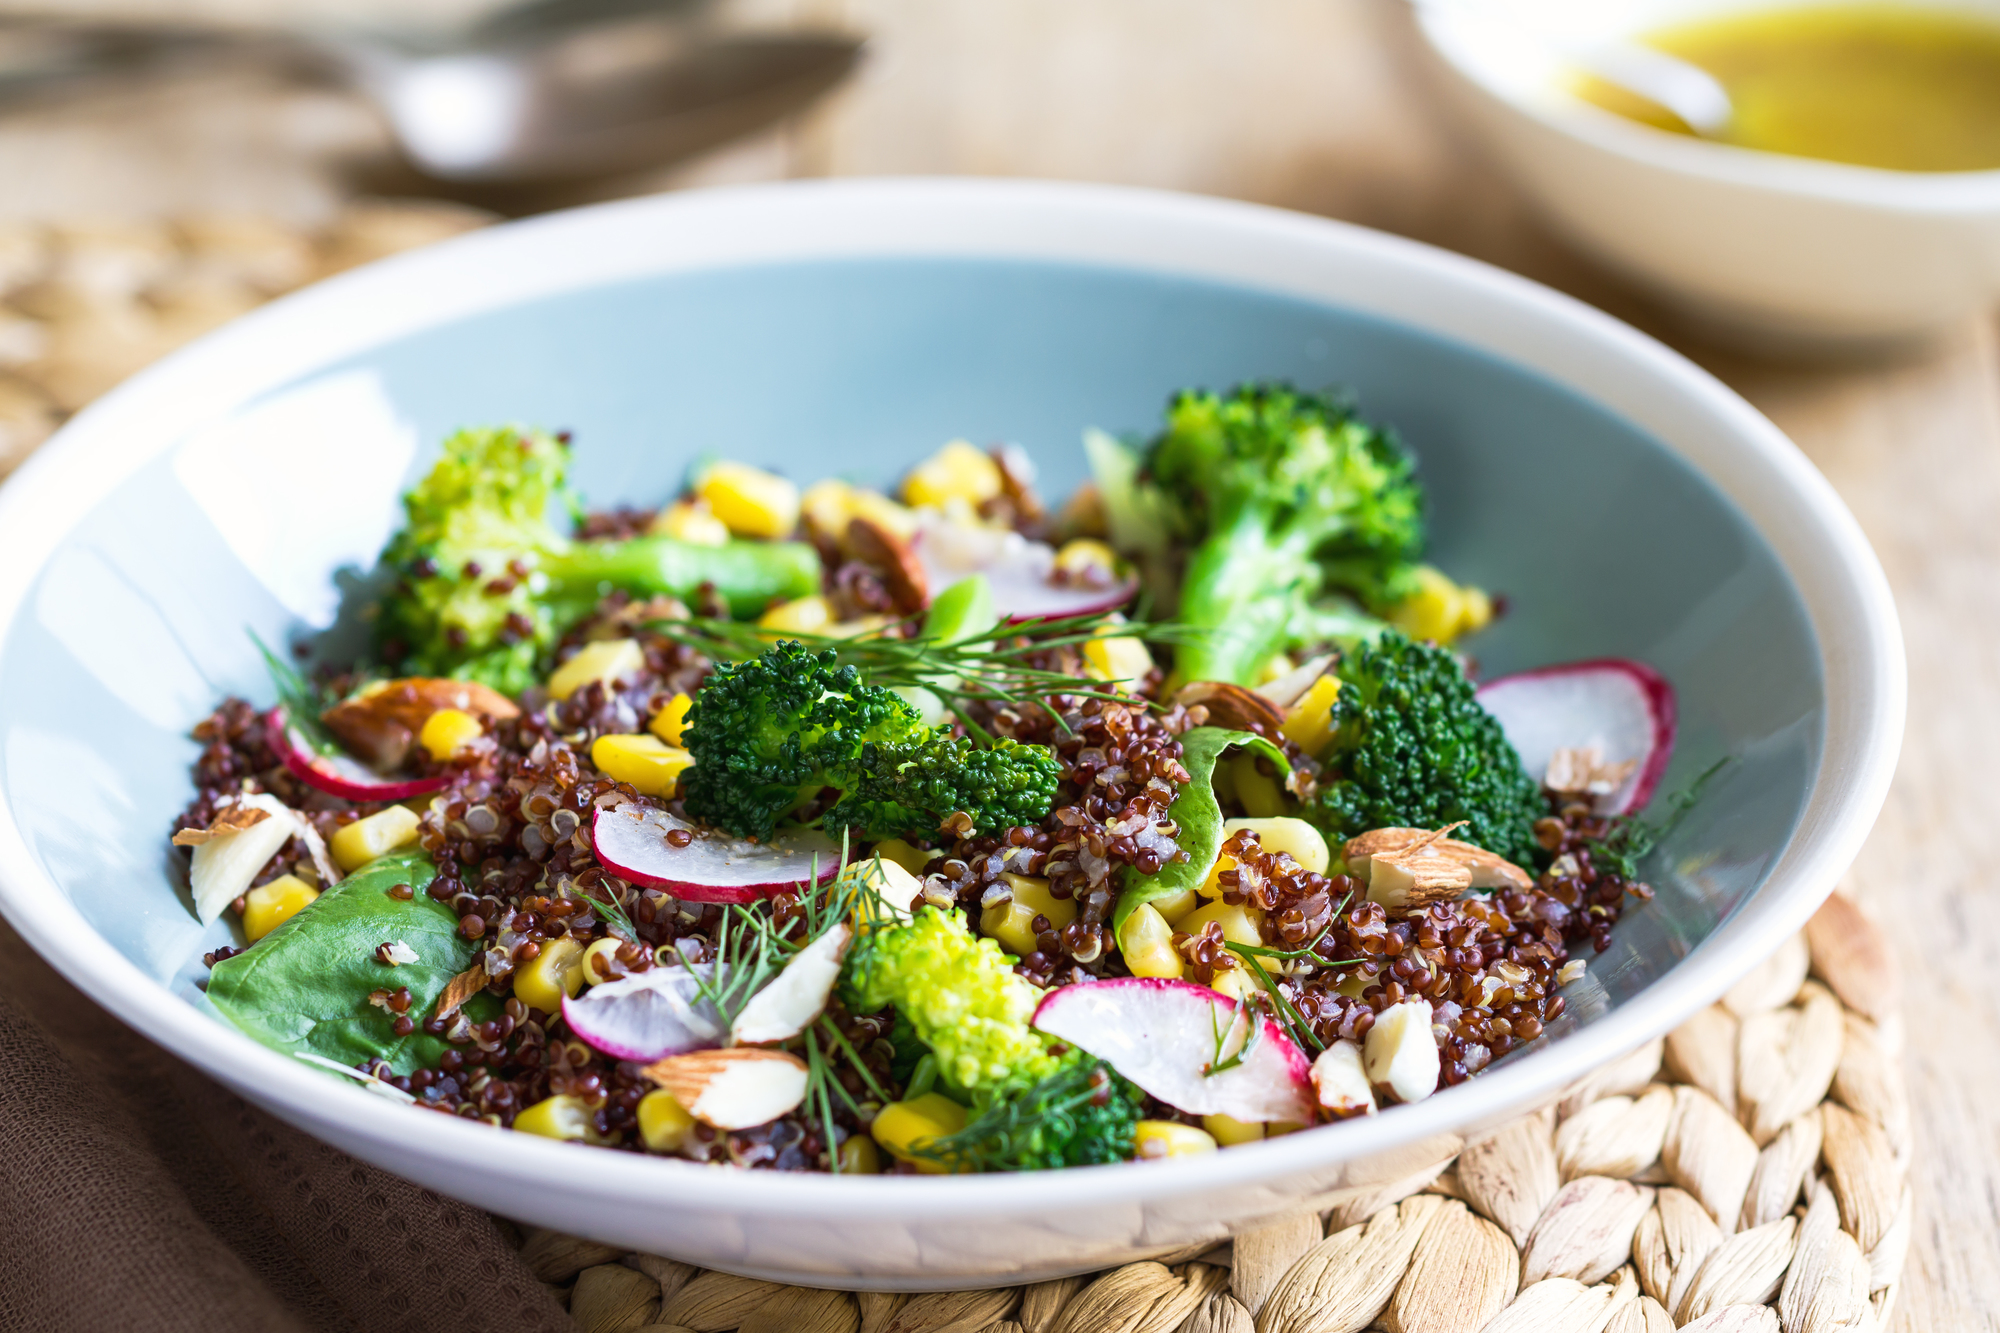 Red Quinoa with corn and broccoli salad by vinaigrette